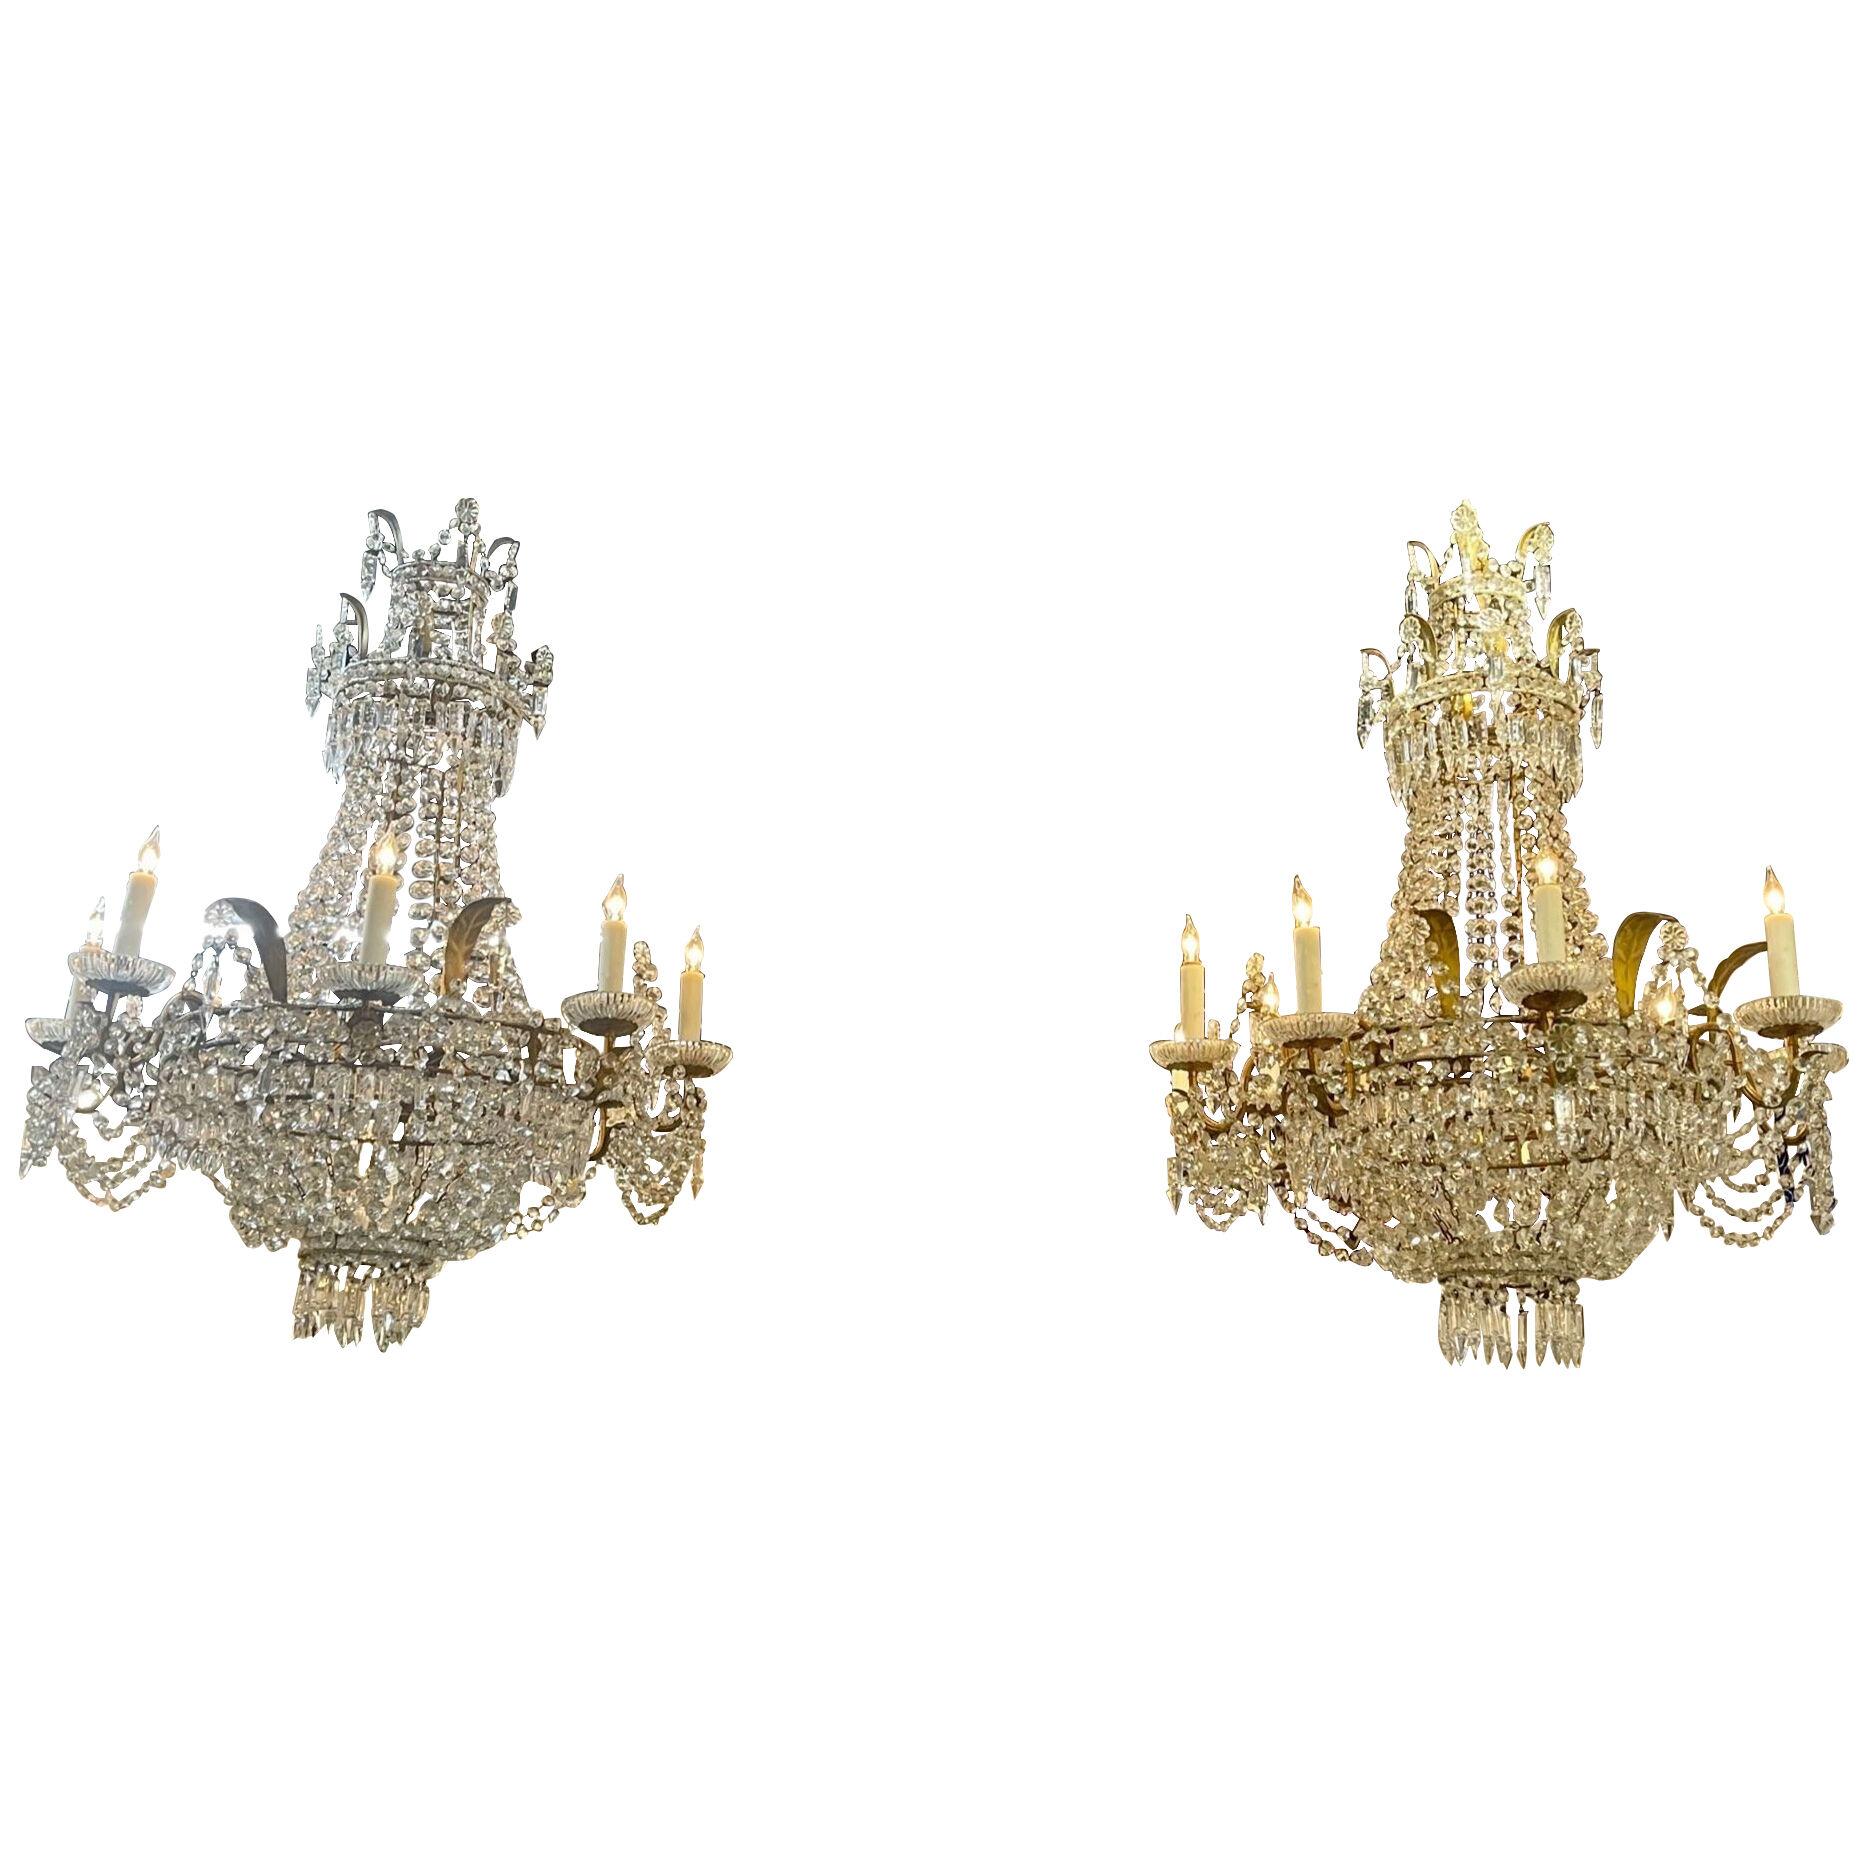 19th Century French Empire Basket Style Chandeliers